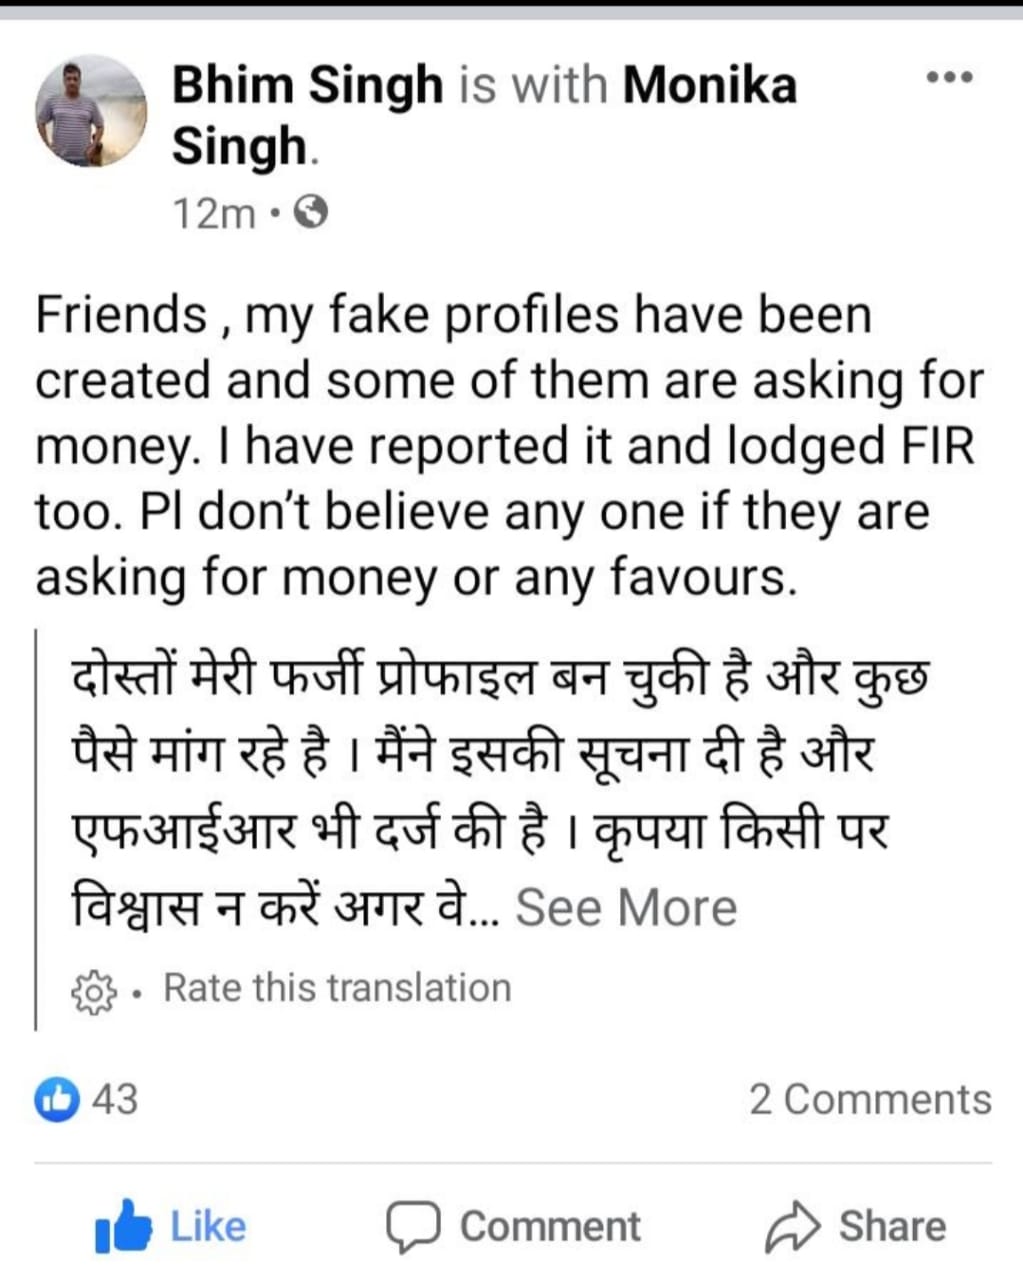 Collector Bhimsingh lodged an FIR in the Facebook ID hack case in raigarh